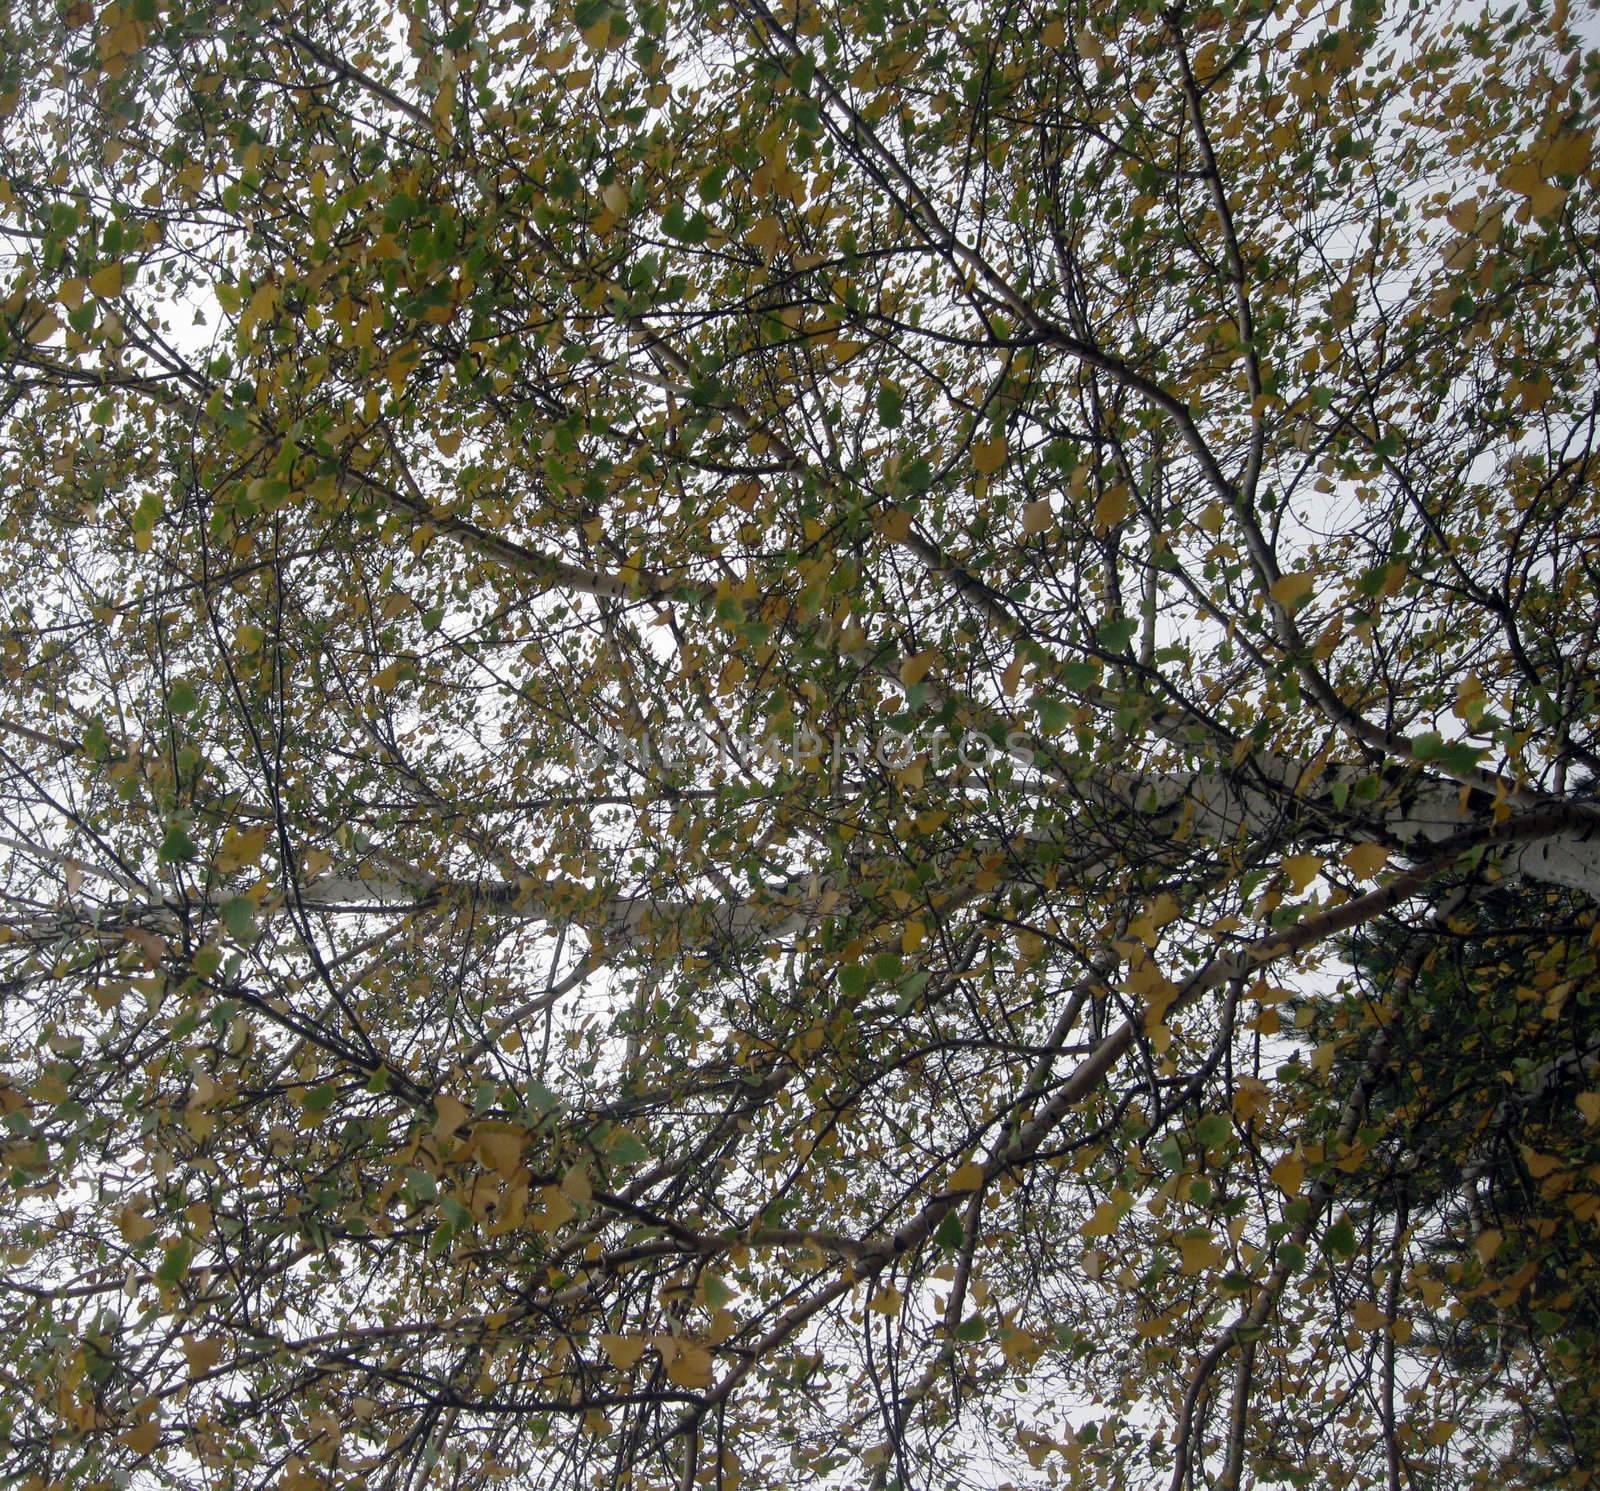 Autumn birch tree with the turned yellow leaves